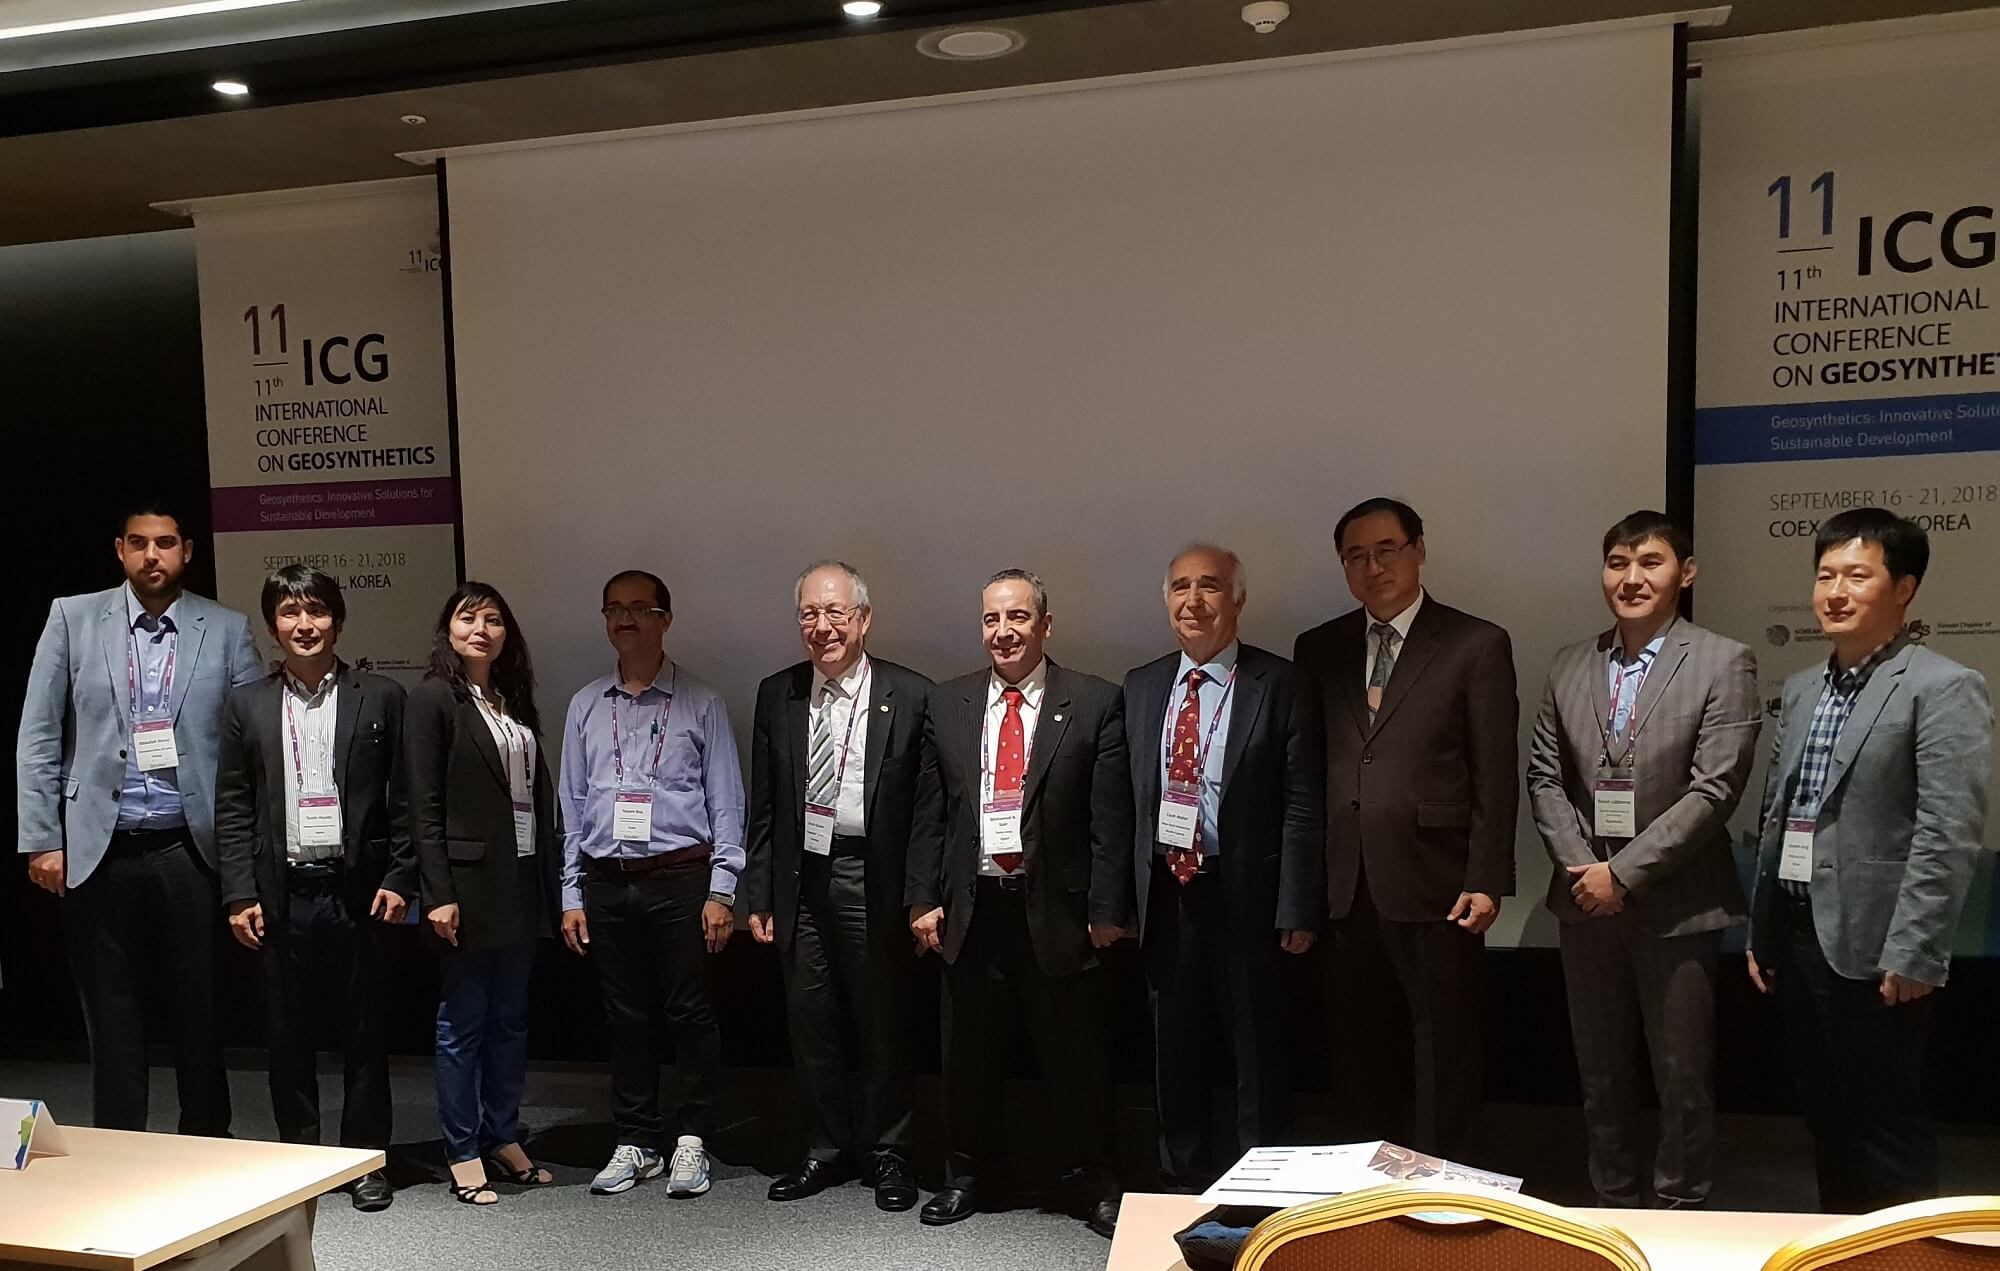 Near East University was represented at the 11th International Conference on Geosynthetics in Korea